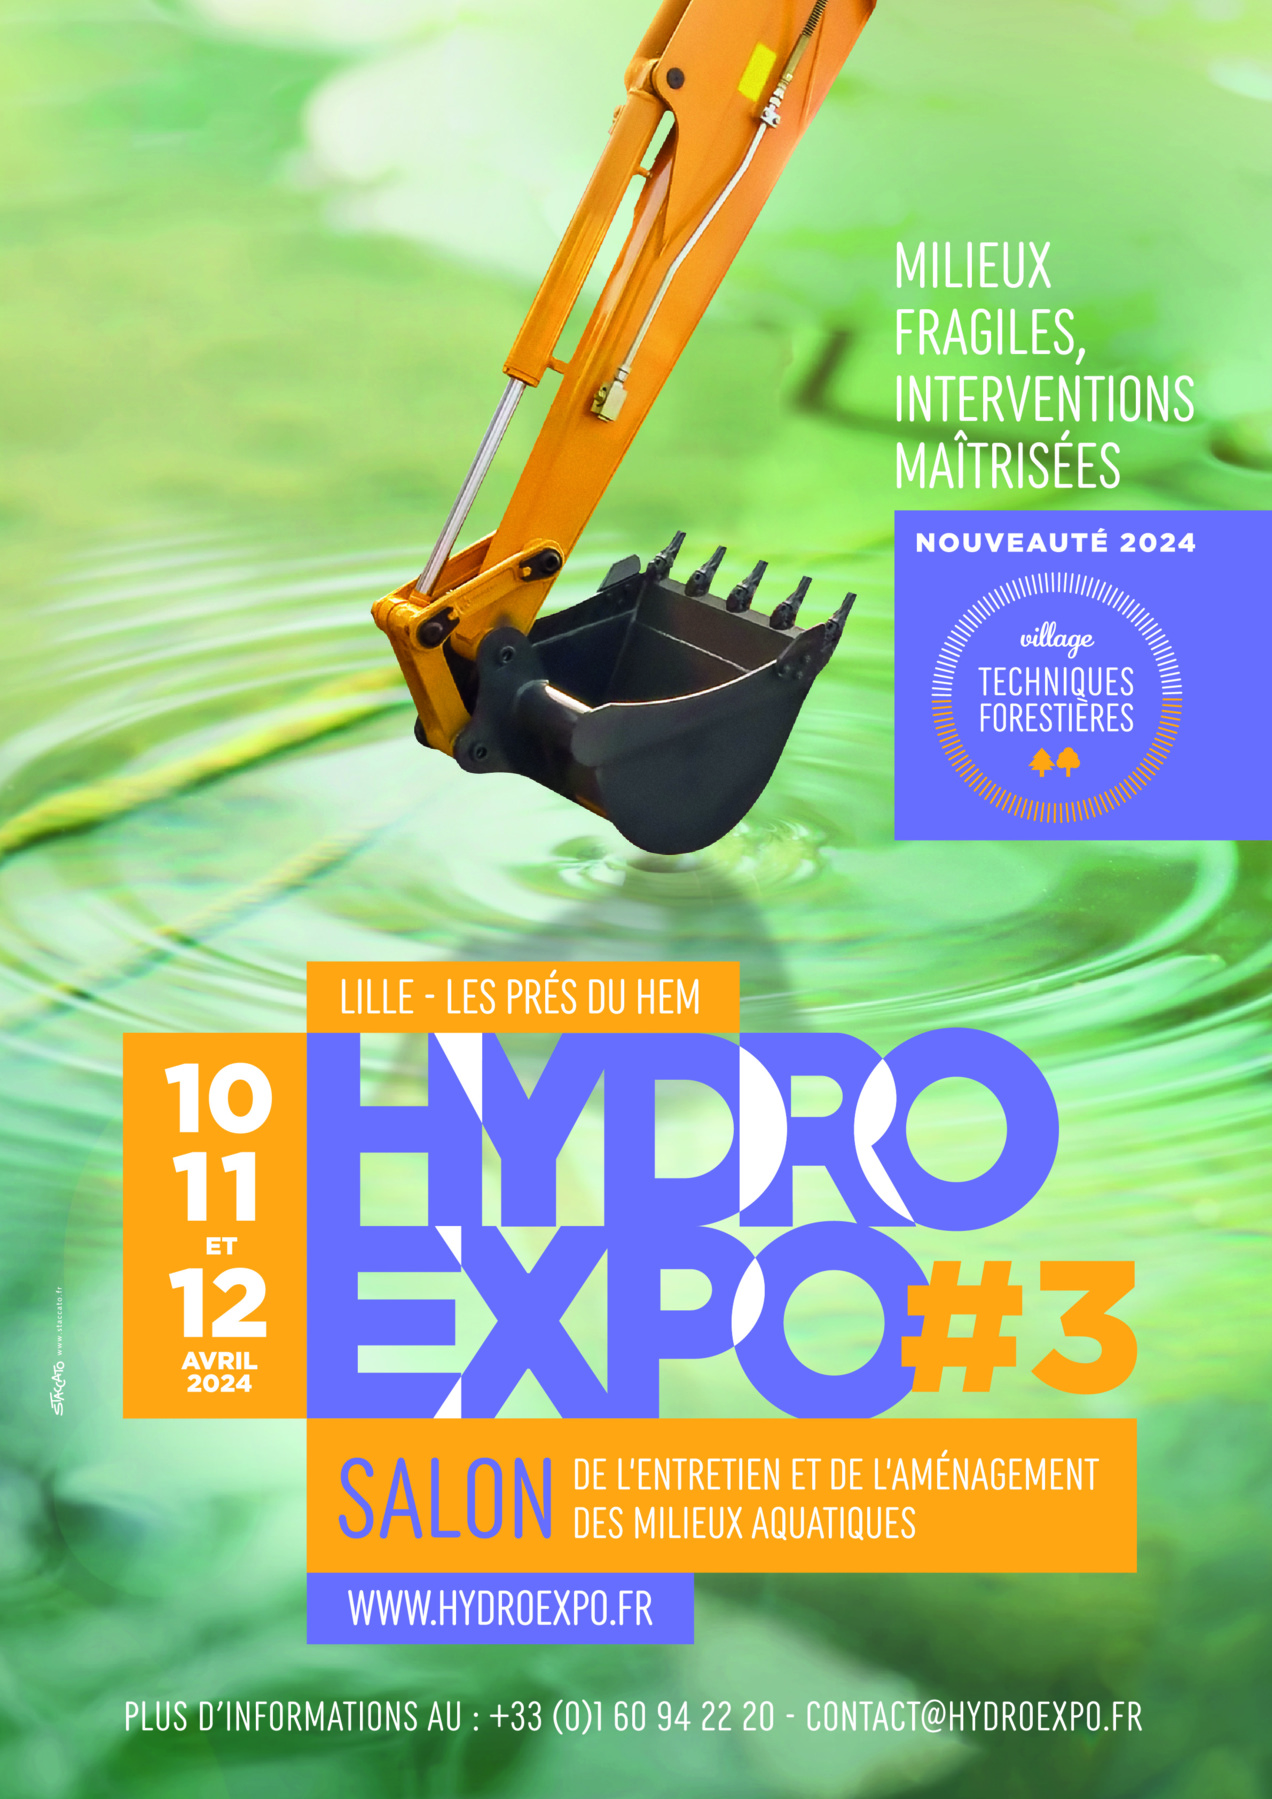 Press release - HydroExpo: See you in April 2024 for the third edition!